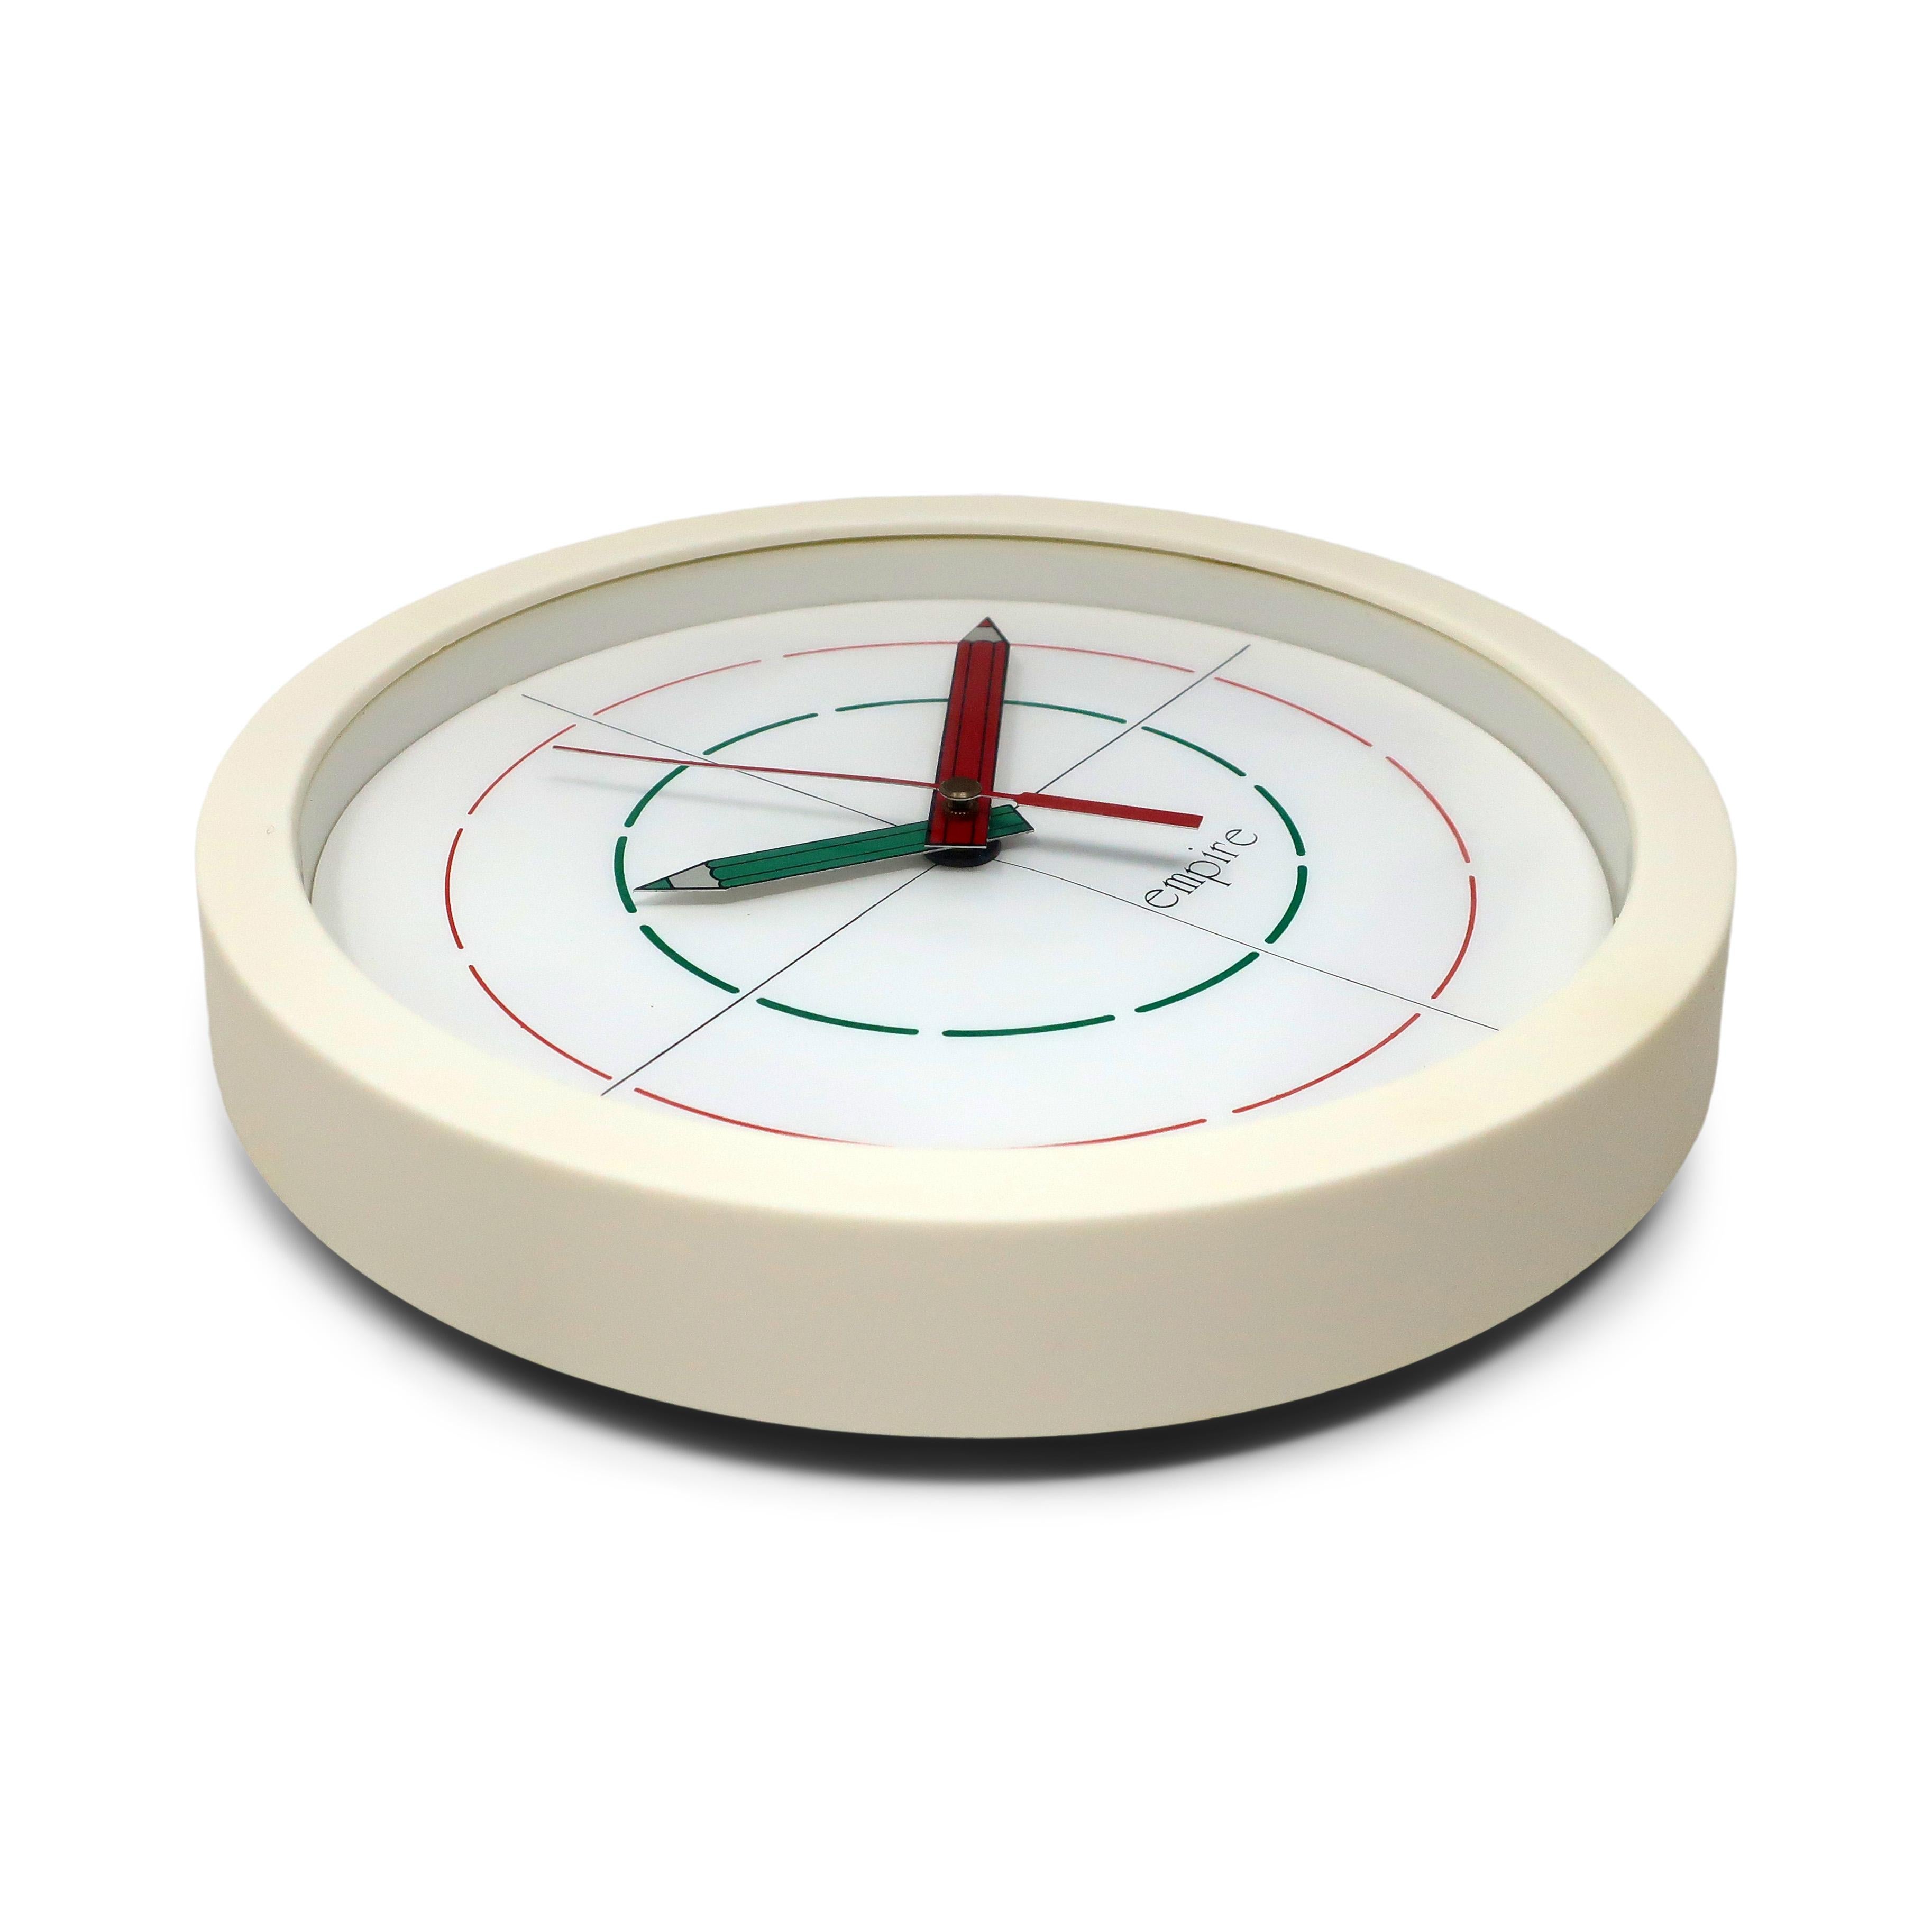 A round white 1980s wall clock by Empire. A white frame and white face with dashed red and green lines to show where the clock's numbers would appear. Hands in the shape of pencils are metal and painted red and green, with a touch of the underlying